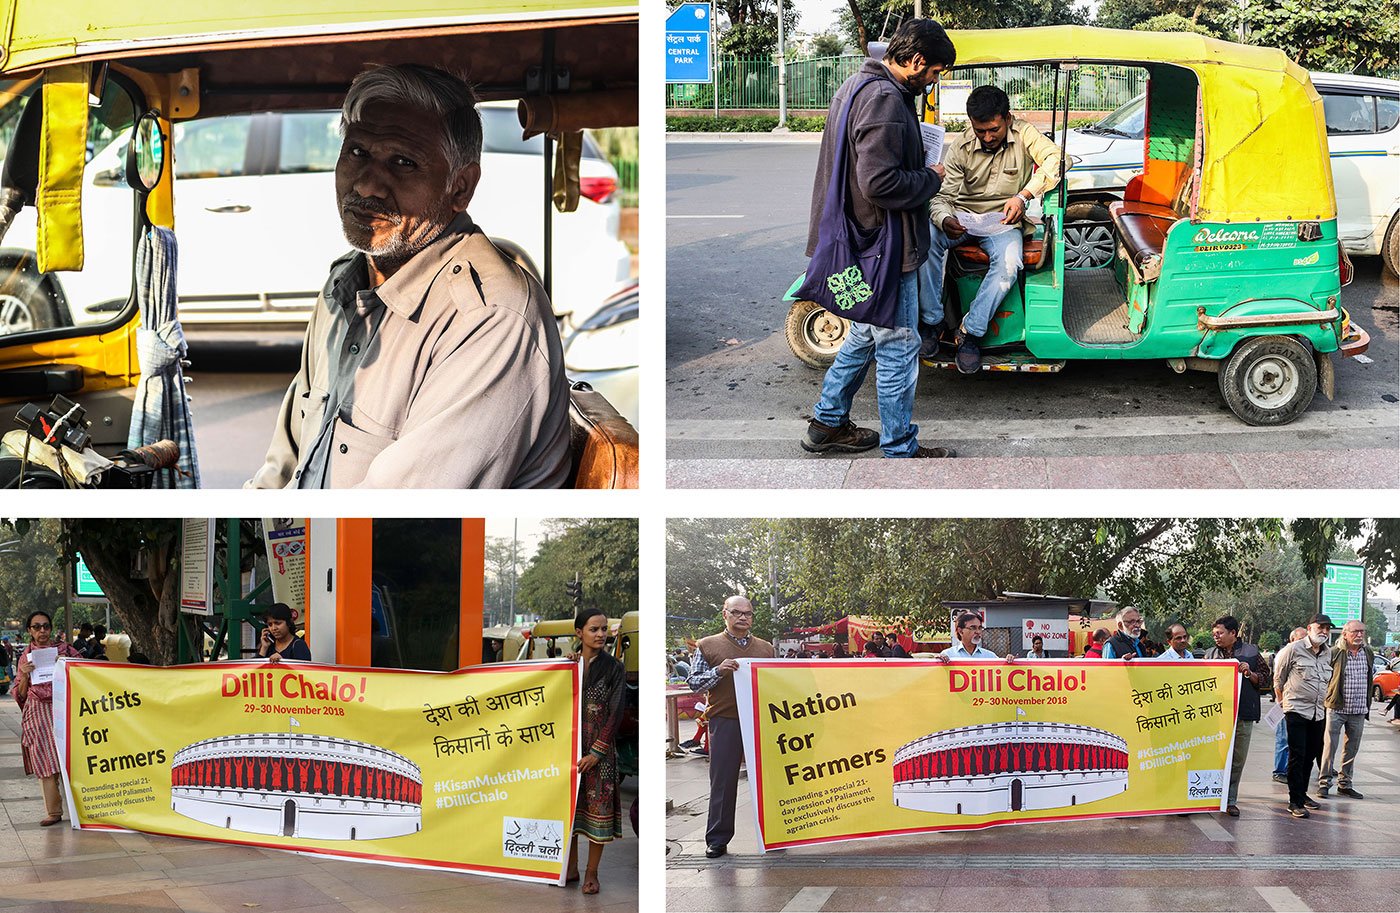 Top left-Jayprakash Yadav, an autorickshaw driver 
Top right - A Nation for Farmer volunteer explaining to an auto rickshaw driver about the March
Bottom left - Artists for Farmers volunteers spreading awareness about the March
Bottom right - Nation for Farmers near the Rajiv Chowk metro station 